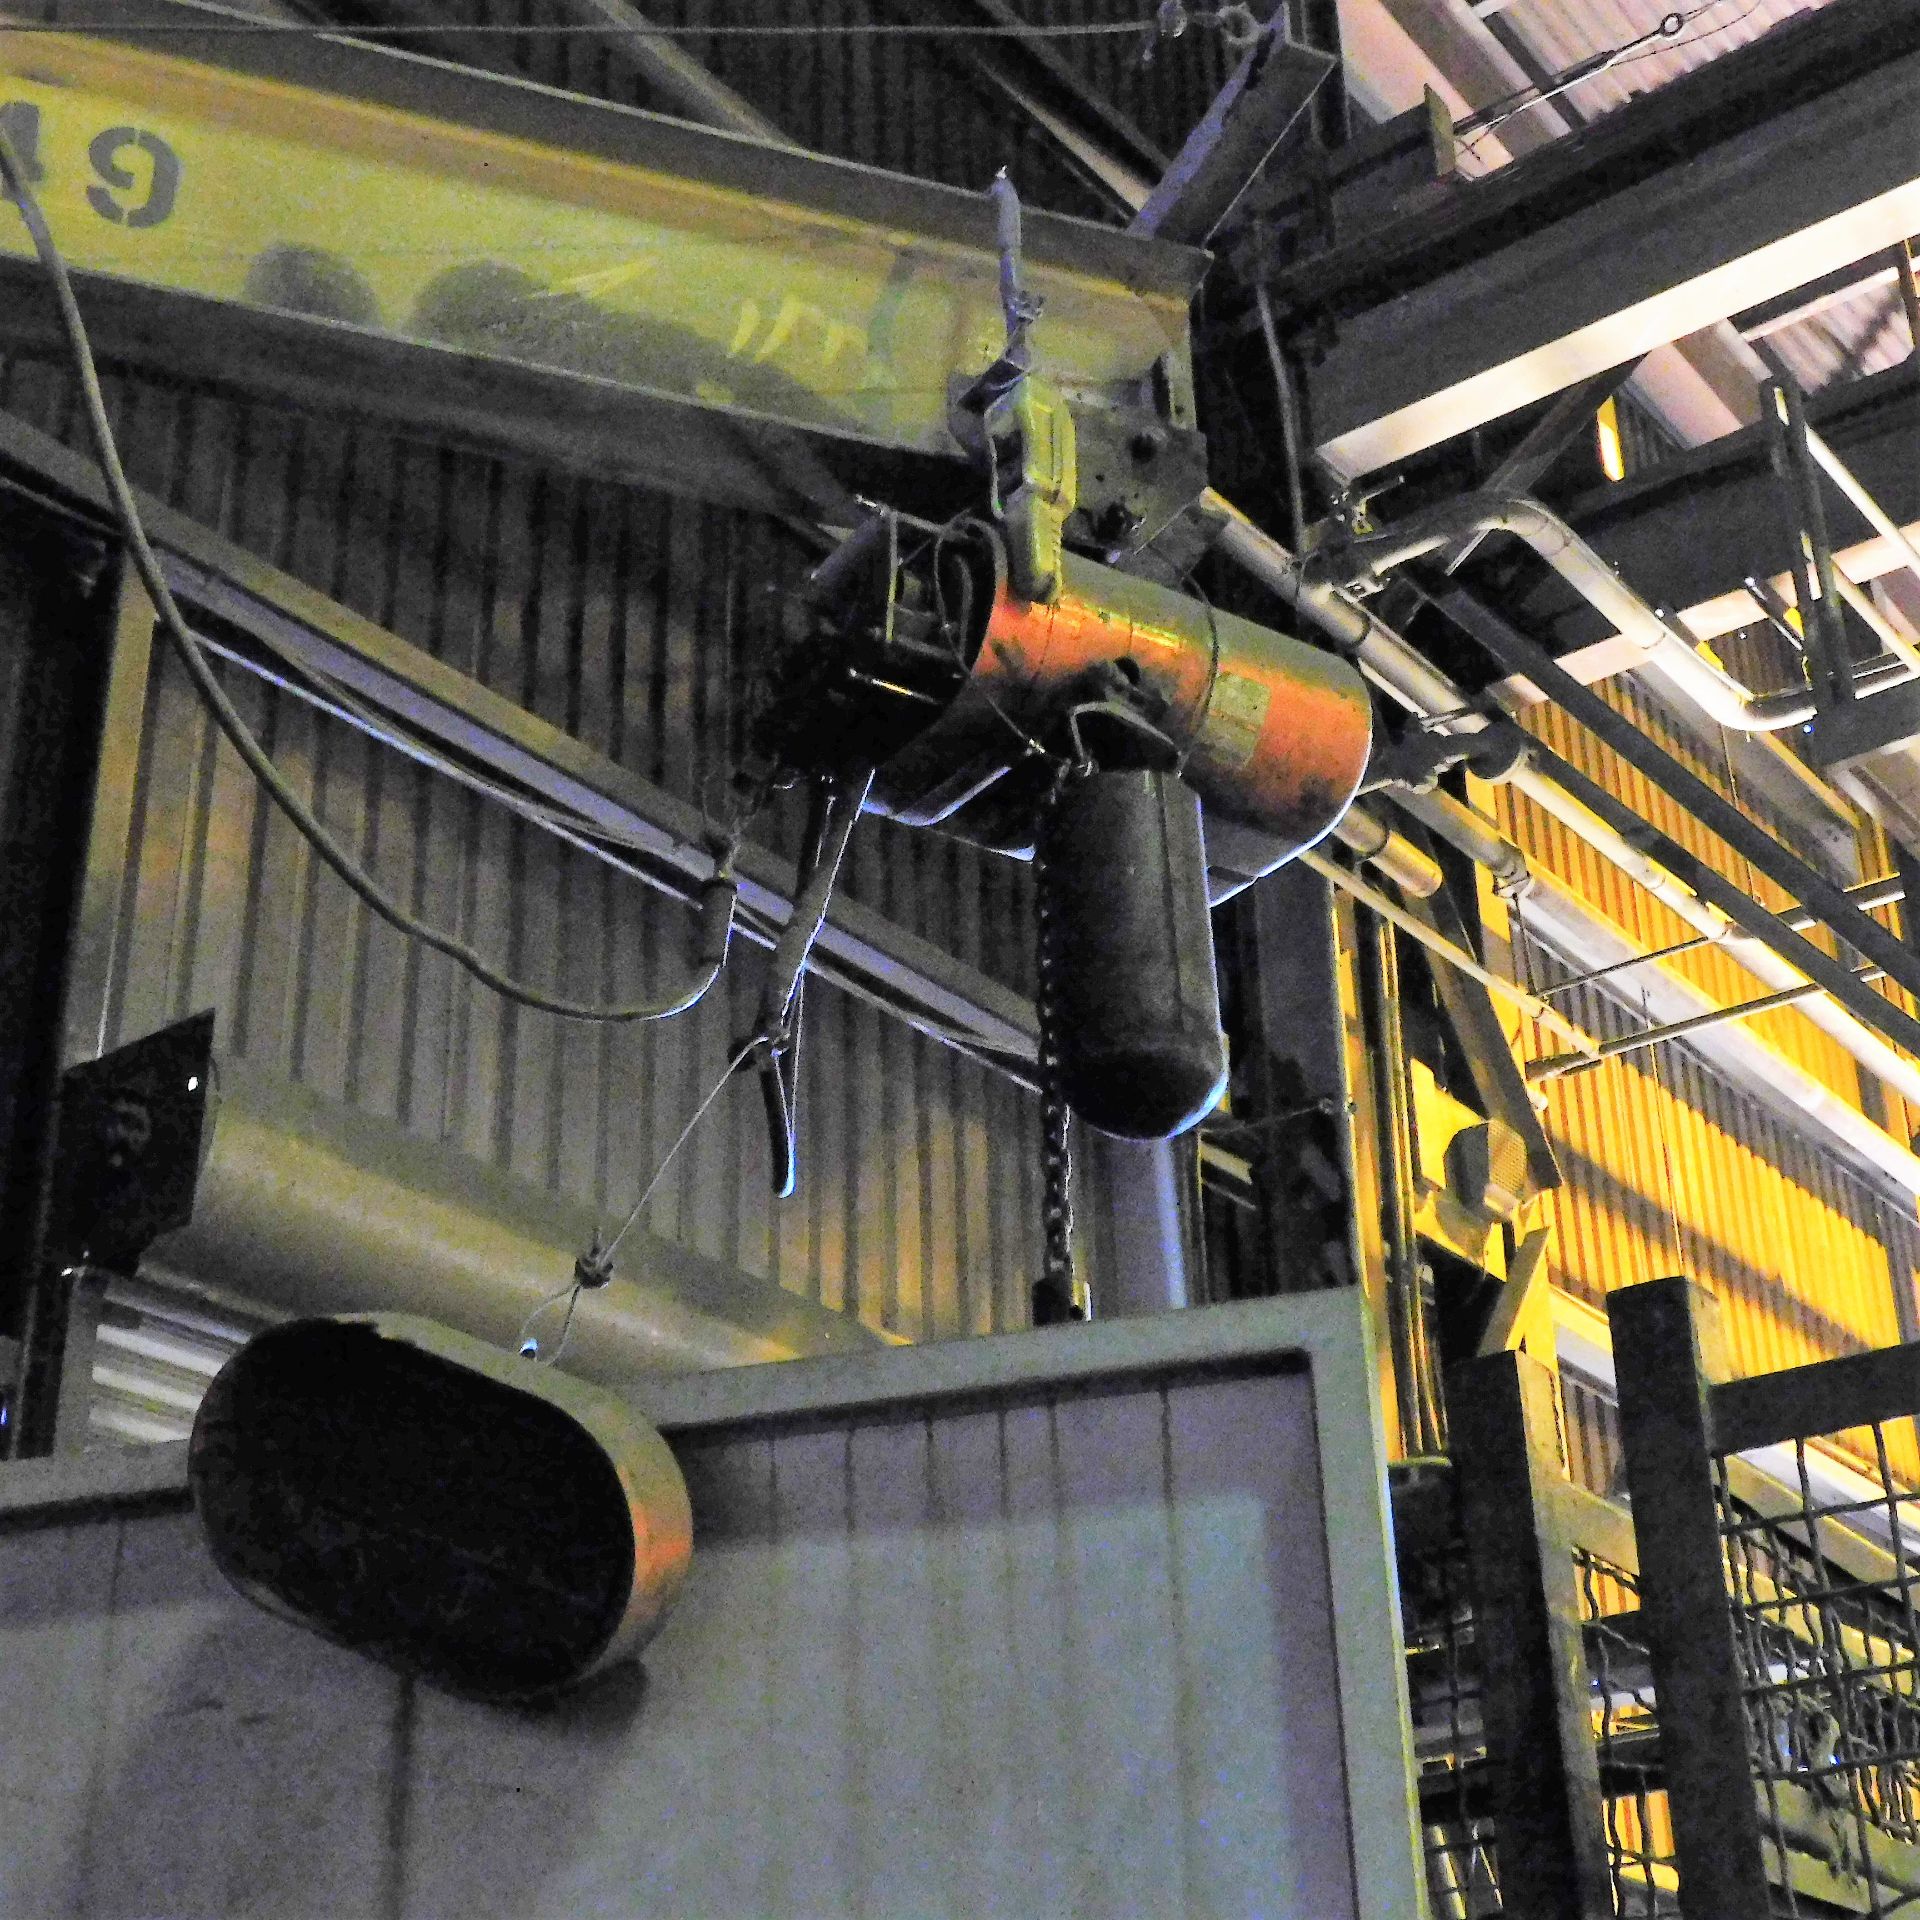 WALL JIB W/ C/M 1-TON ELECTRIC HOIST W/ PENDANT CONTROLS (LATE REMOVAL - JULY 16) - Image 2 of 2